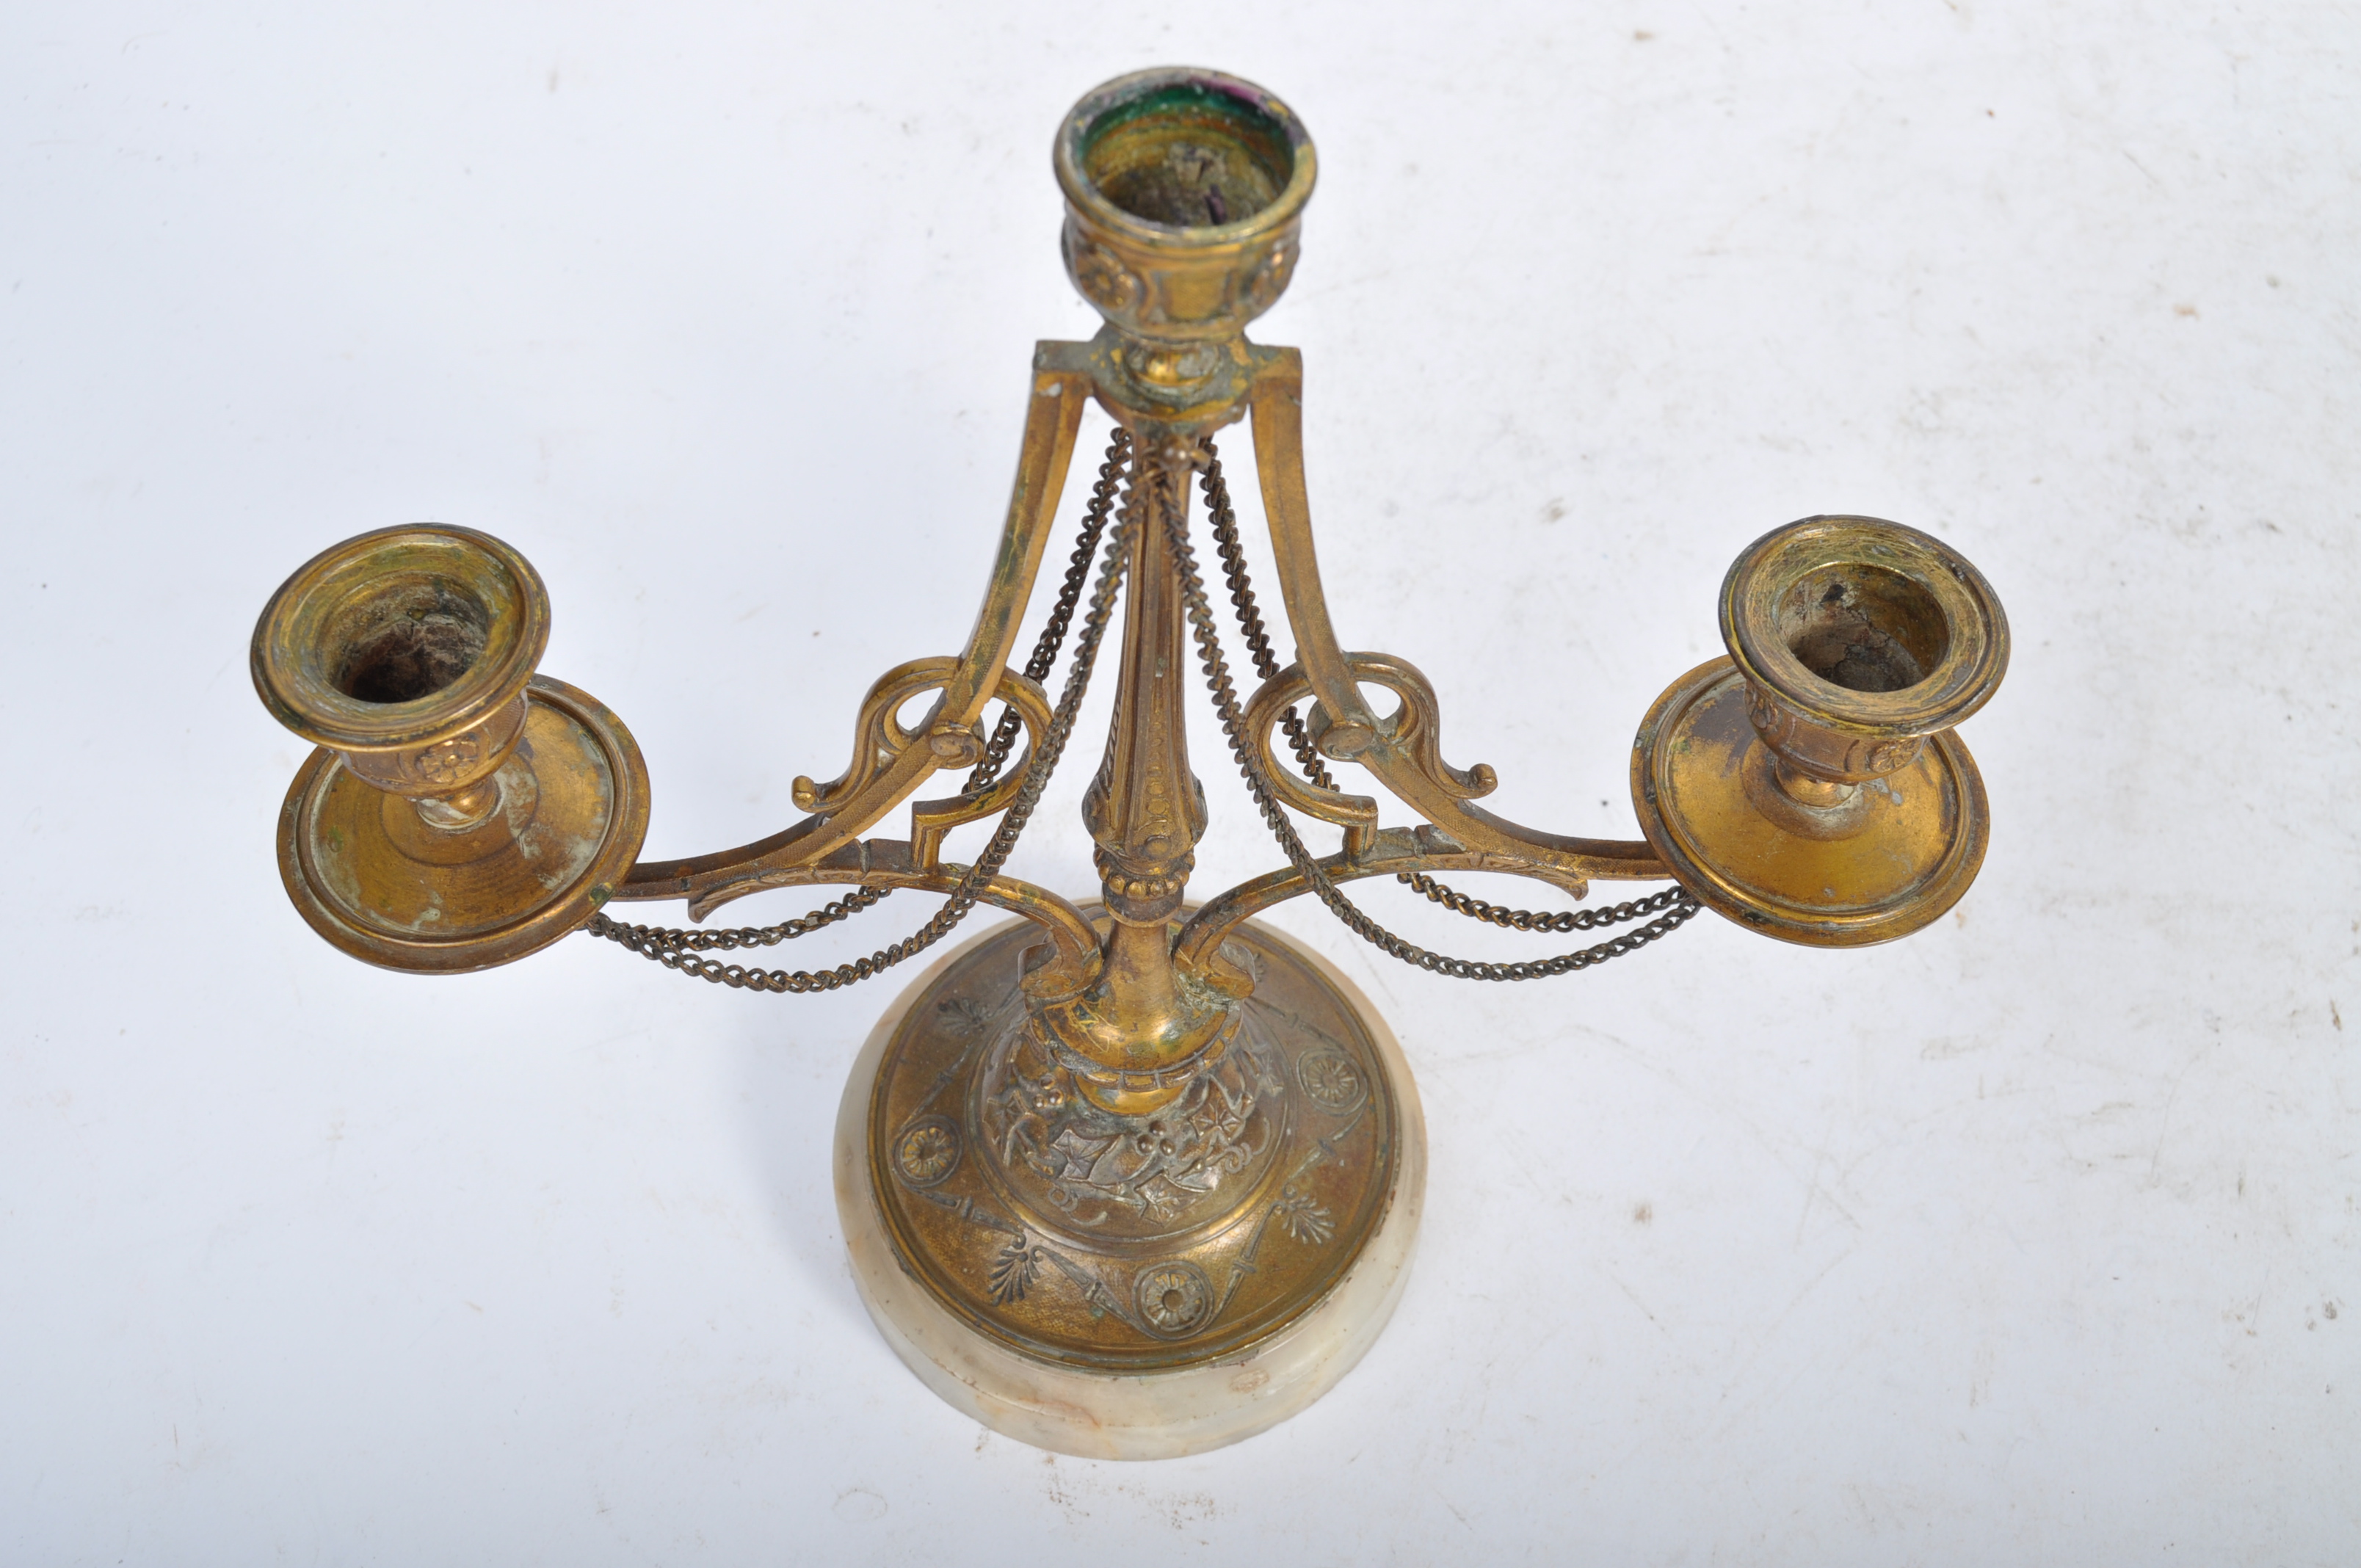 PAIR OF 19TH CENTURY BRONZE AND MARBLE CANDLESTICKS - Image 8 of 8